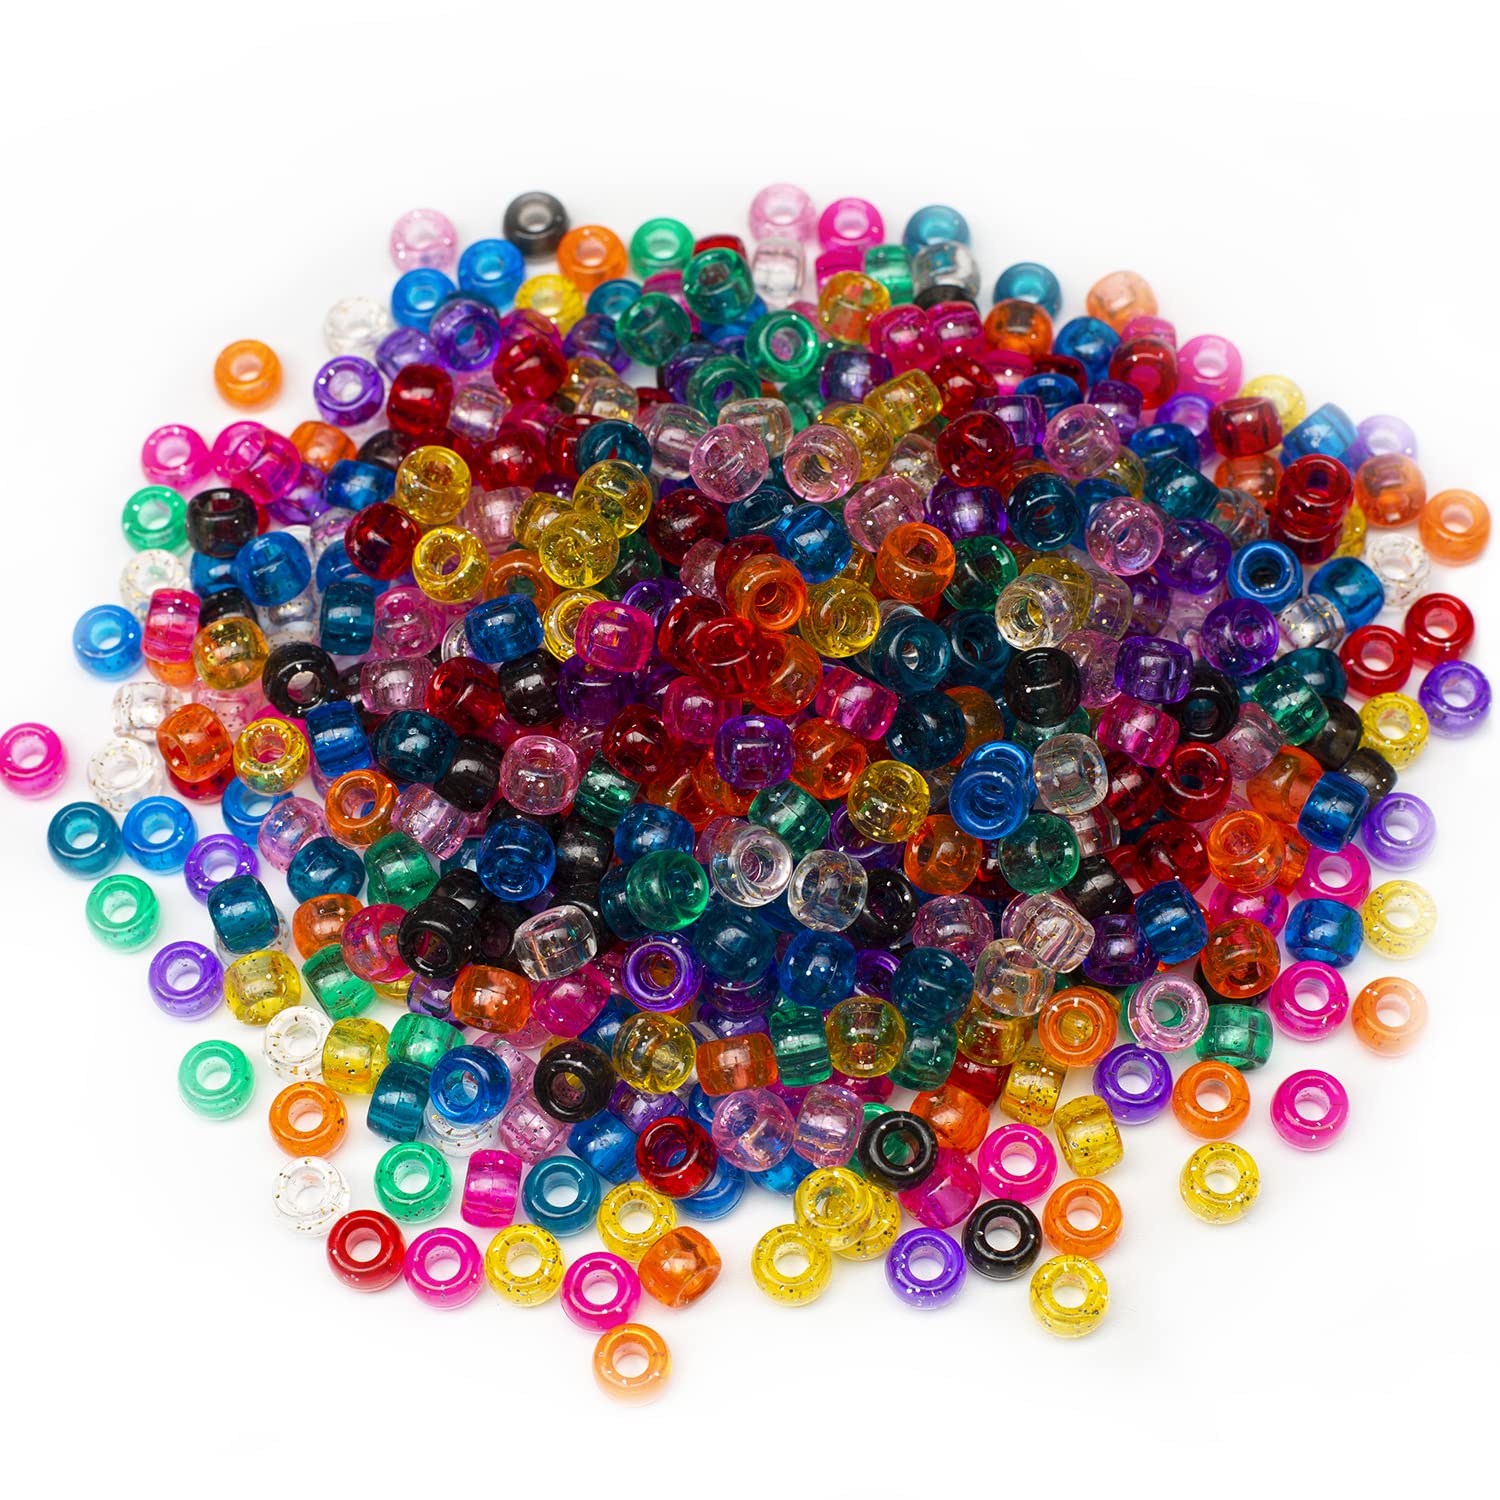 Clear Pony Beads - 9mm - 300/Pack